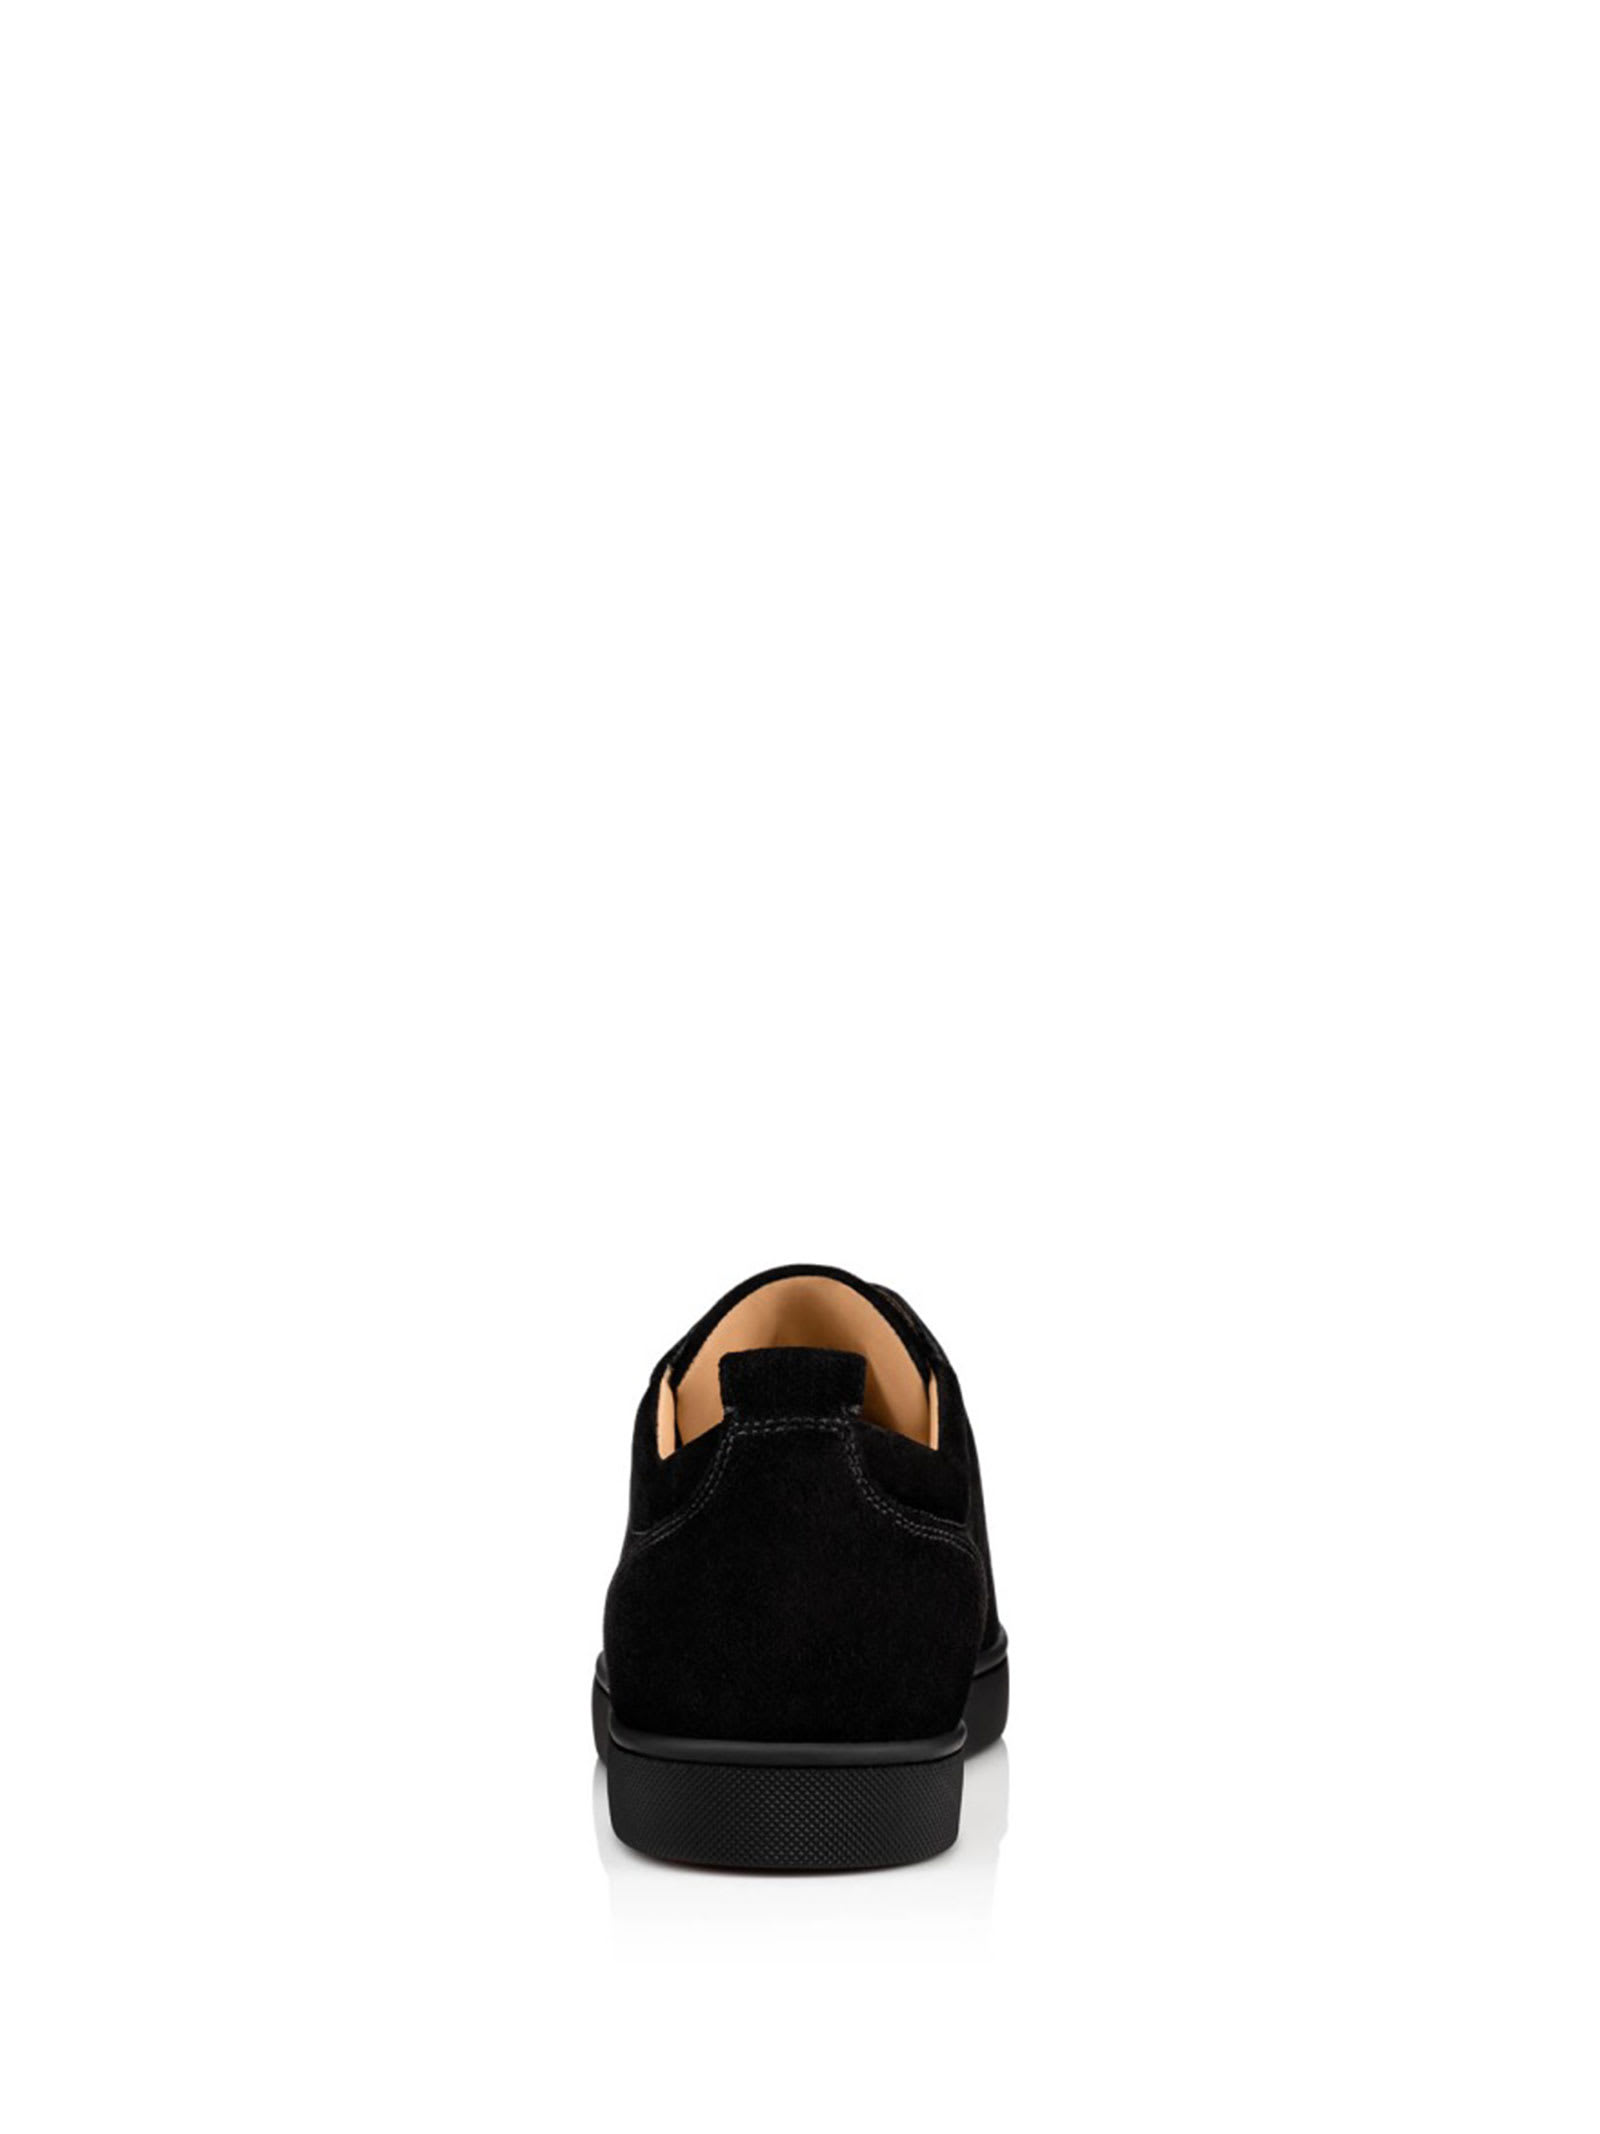 Shop Christian Louboutin Louis Sneakers With Spikes In Black Black